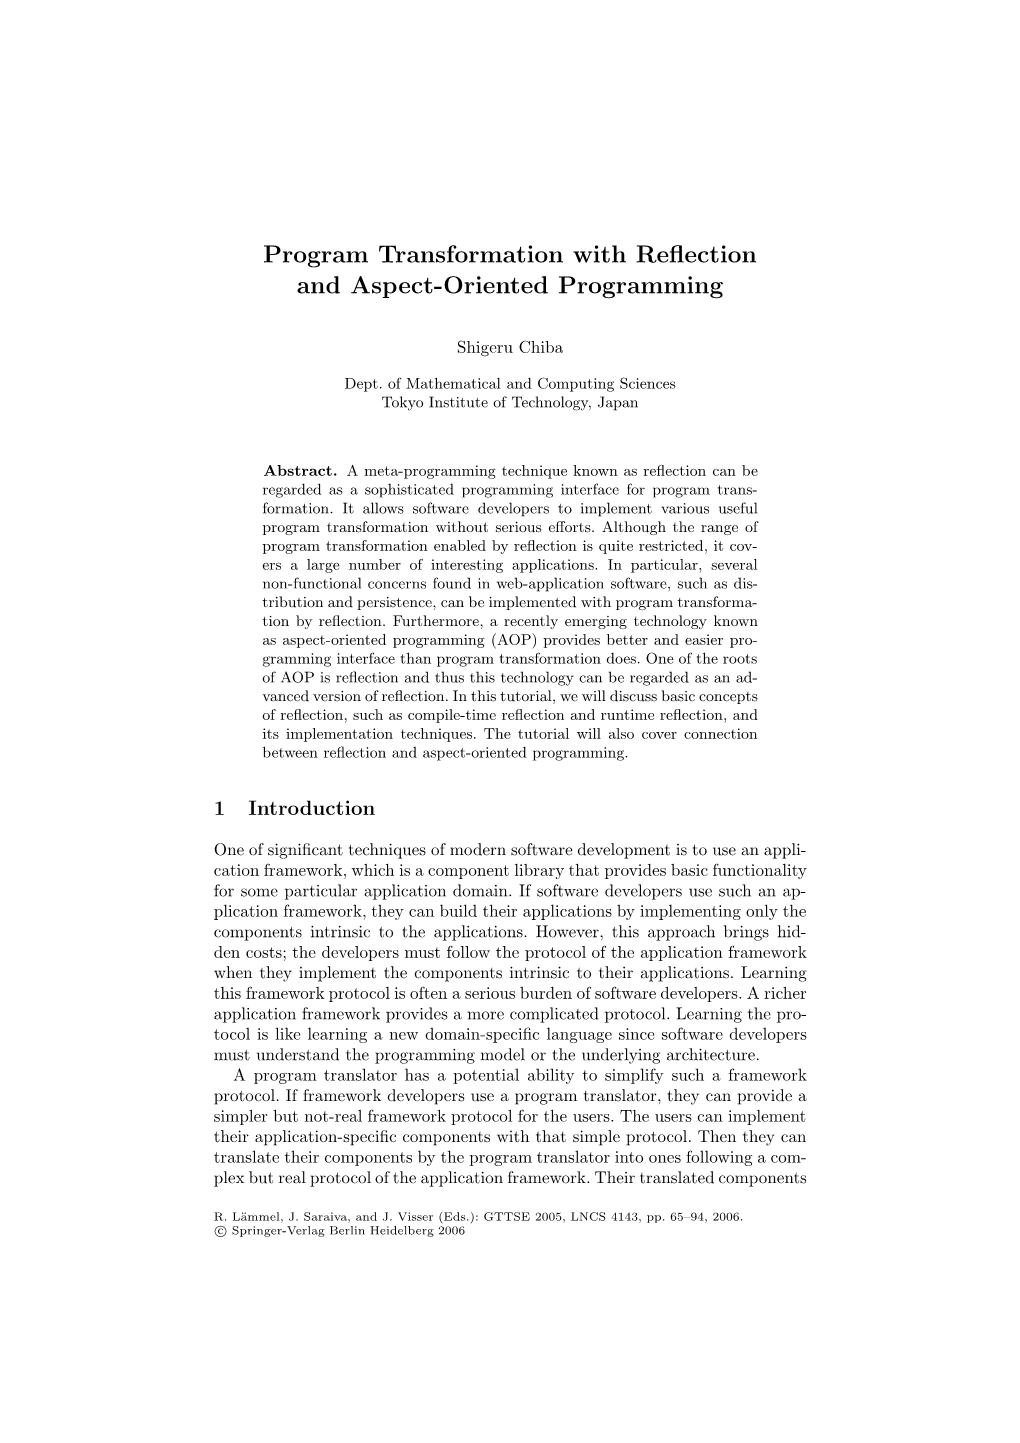 Program Transformation with Reflection and Aspect-Oriented